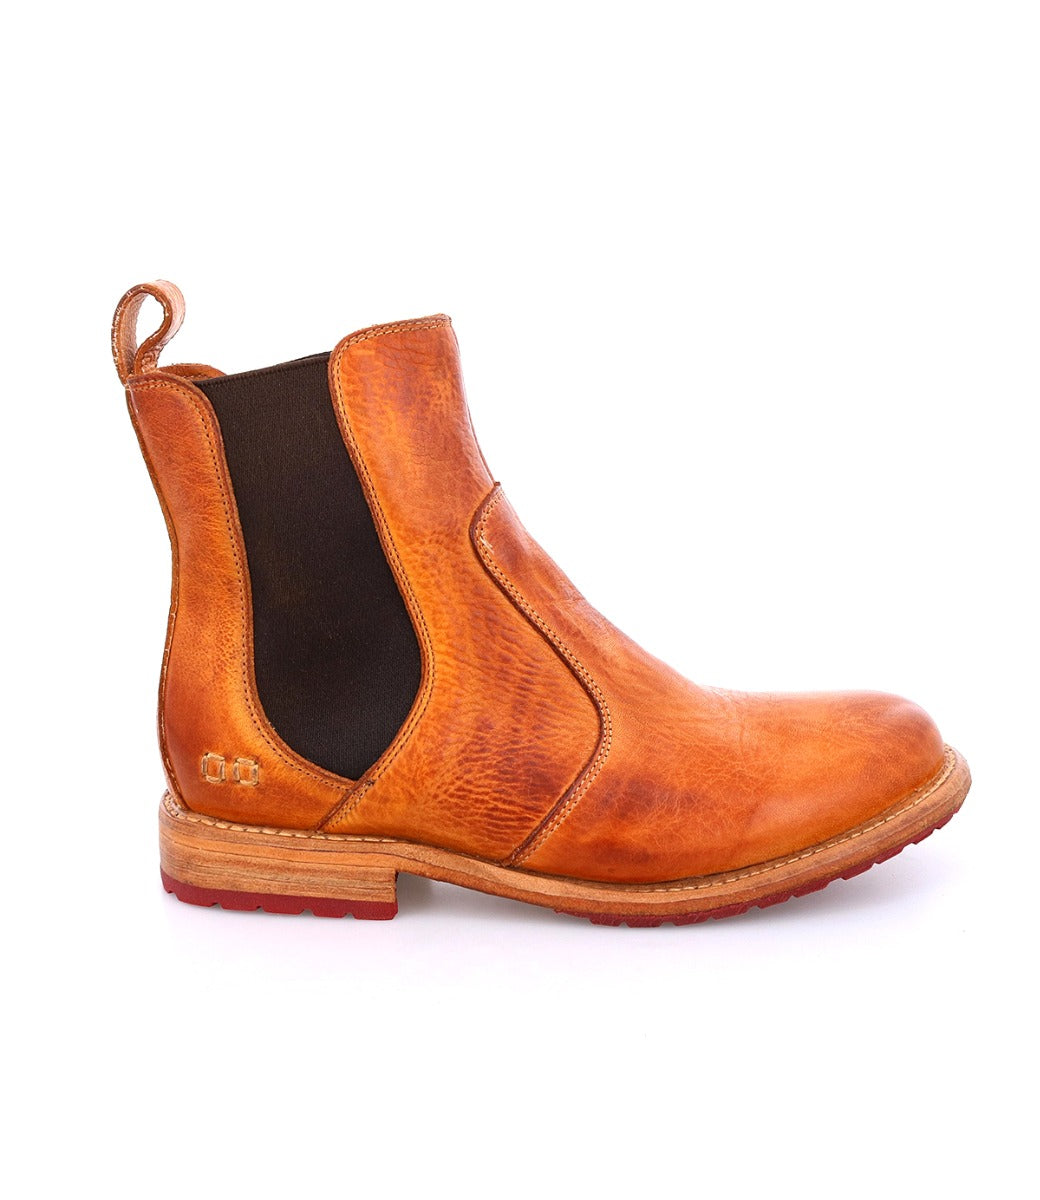 A Nandi pecan pure leather chelsea boot by Bed Stu.